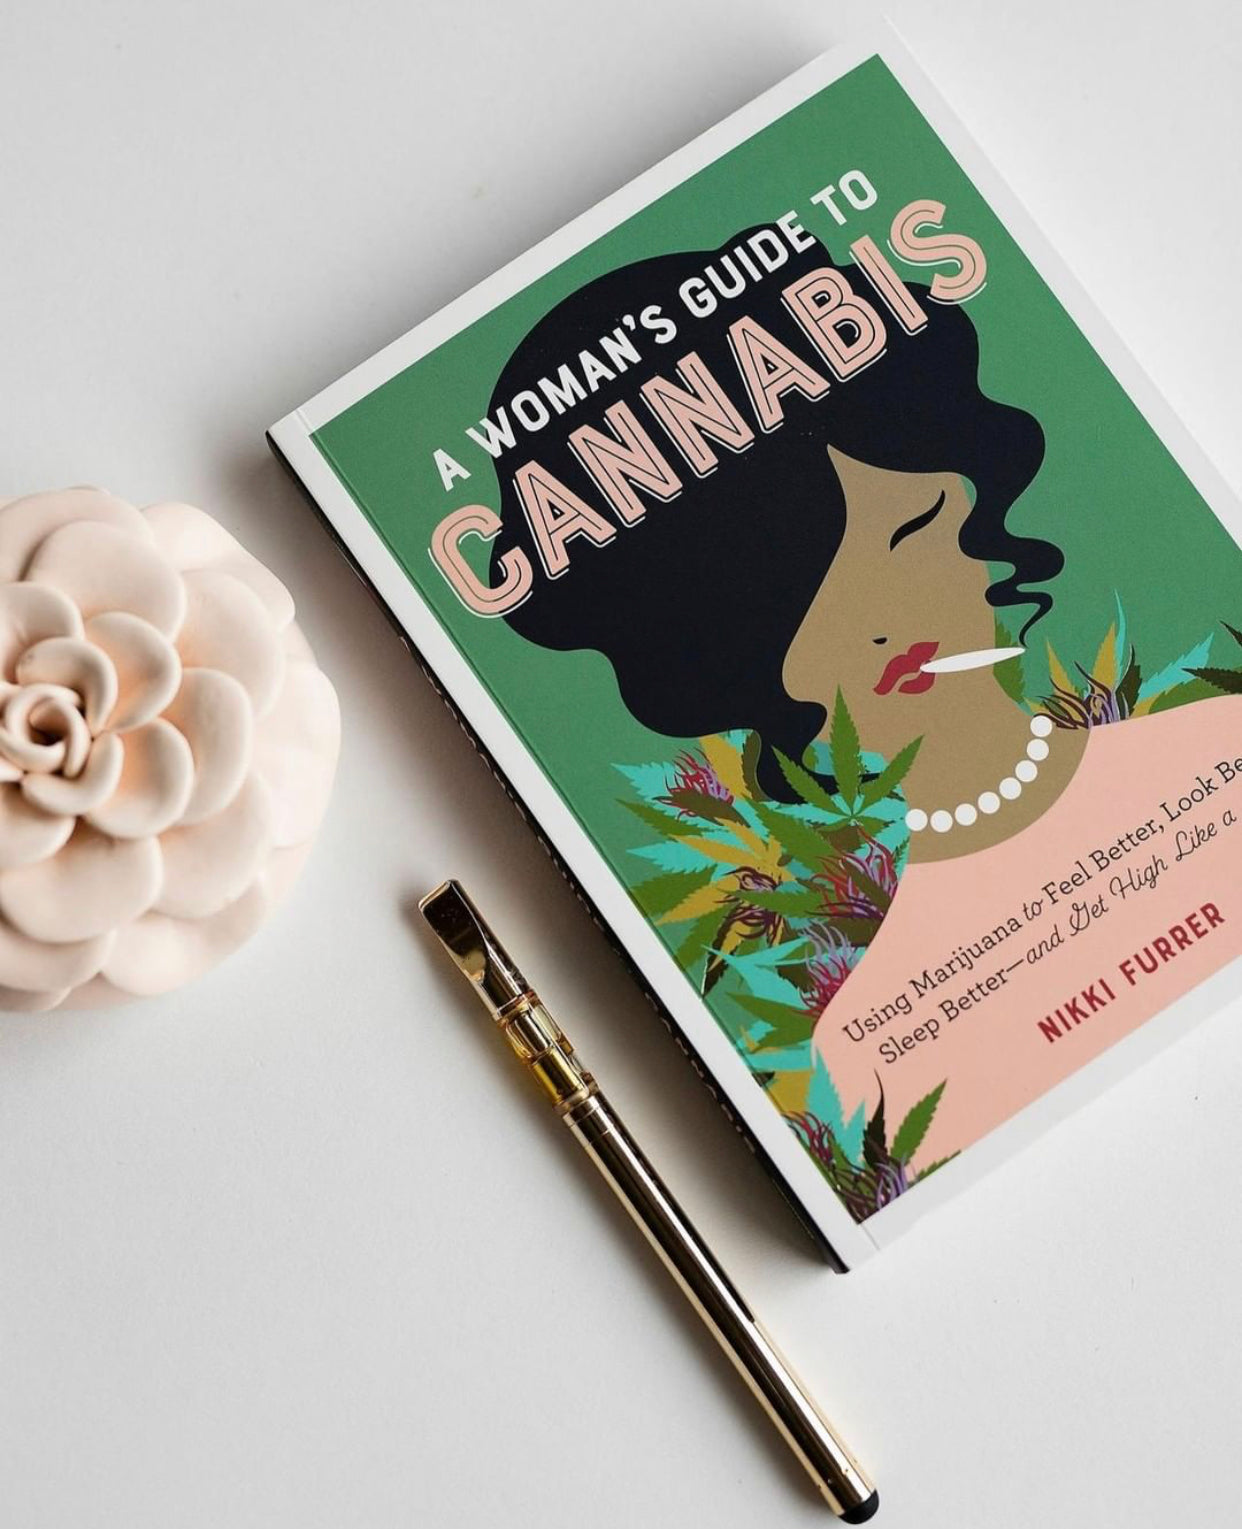 Have you swapped out rosé for cannabis?